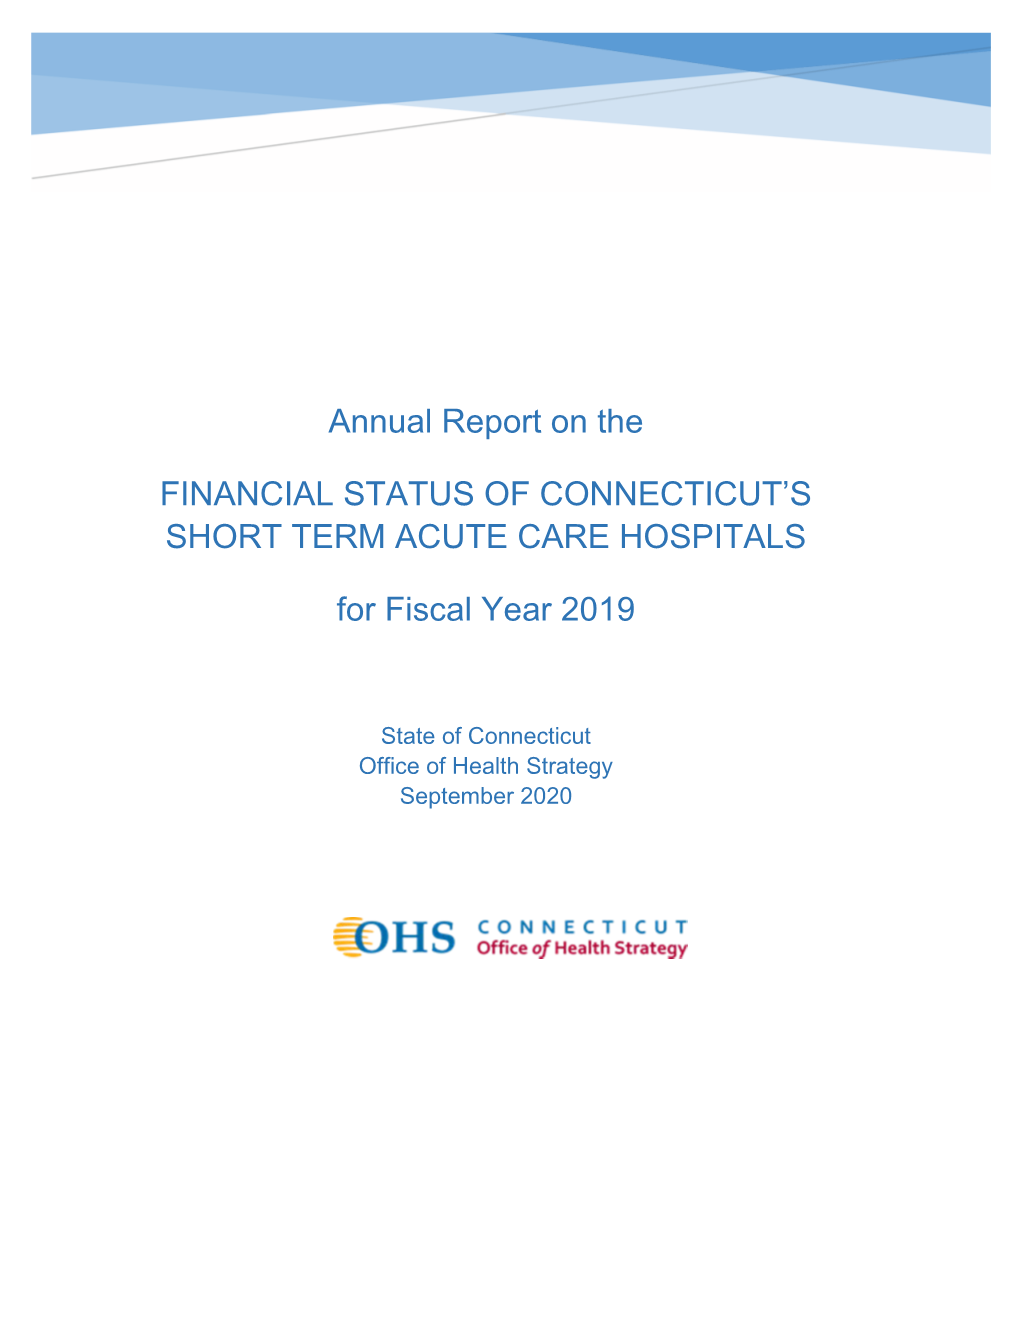 Annual Report on the Financial Status of Connecticut's Short